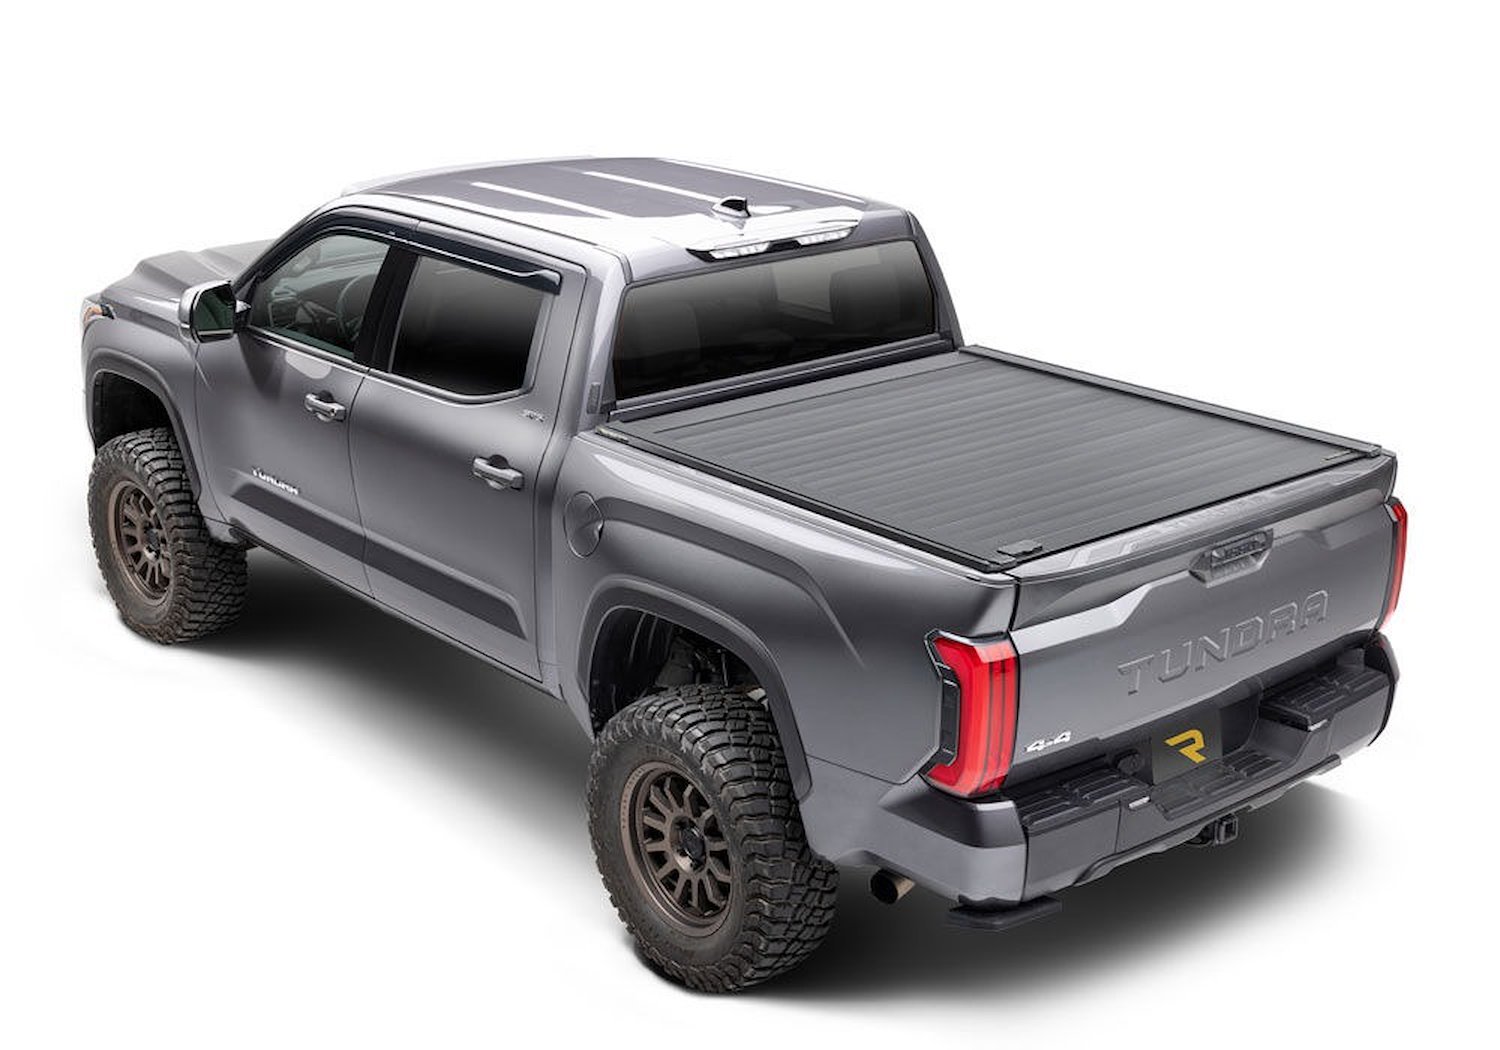 T-80861 RetraxPRO XR Retractable Tonneau Cover Fits Select Toyota Tundra CrewMax 5' 7" Bed with Deck Rail System